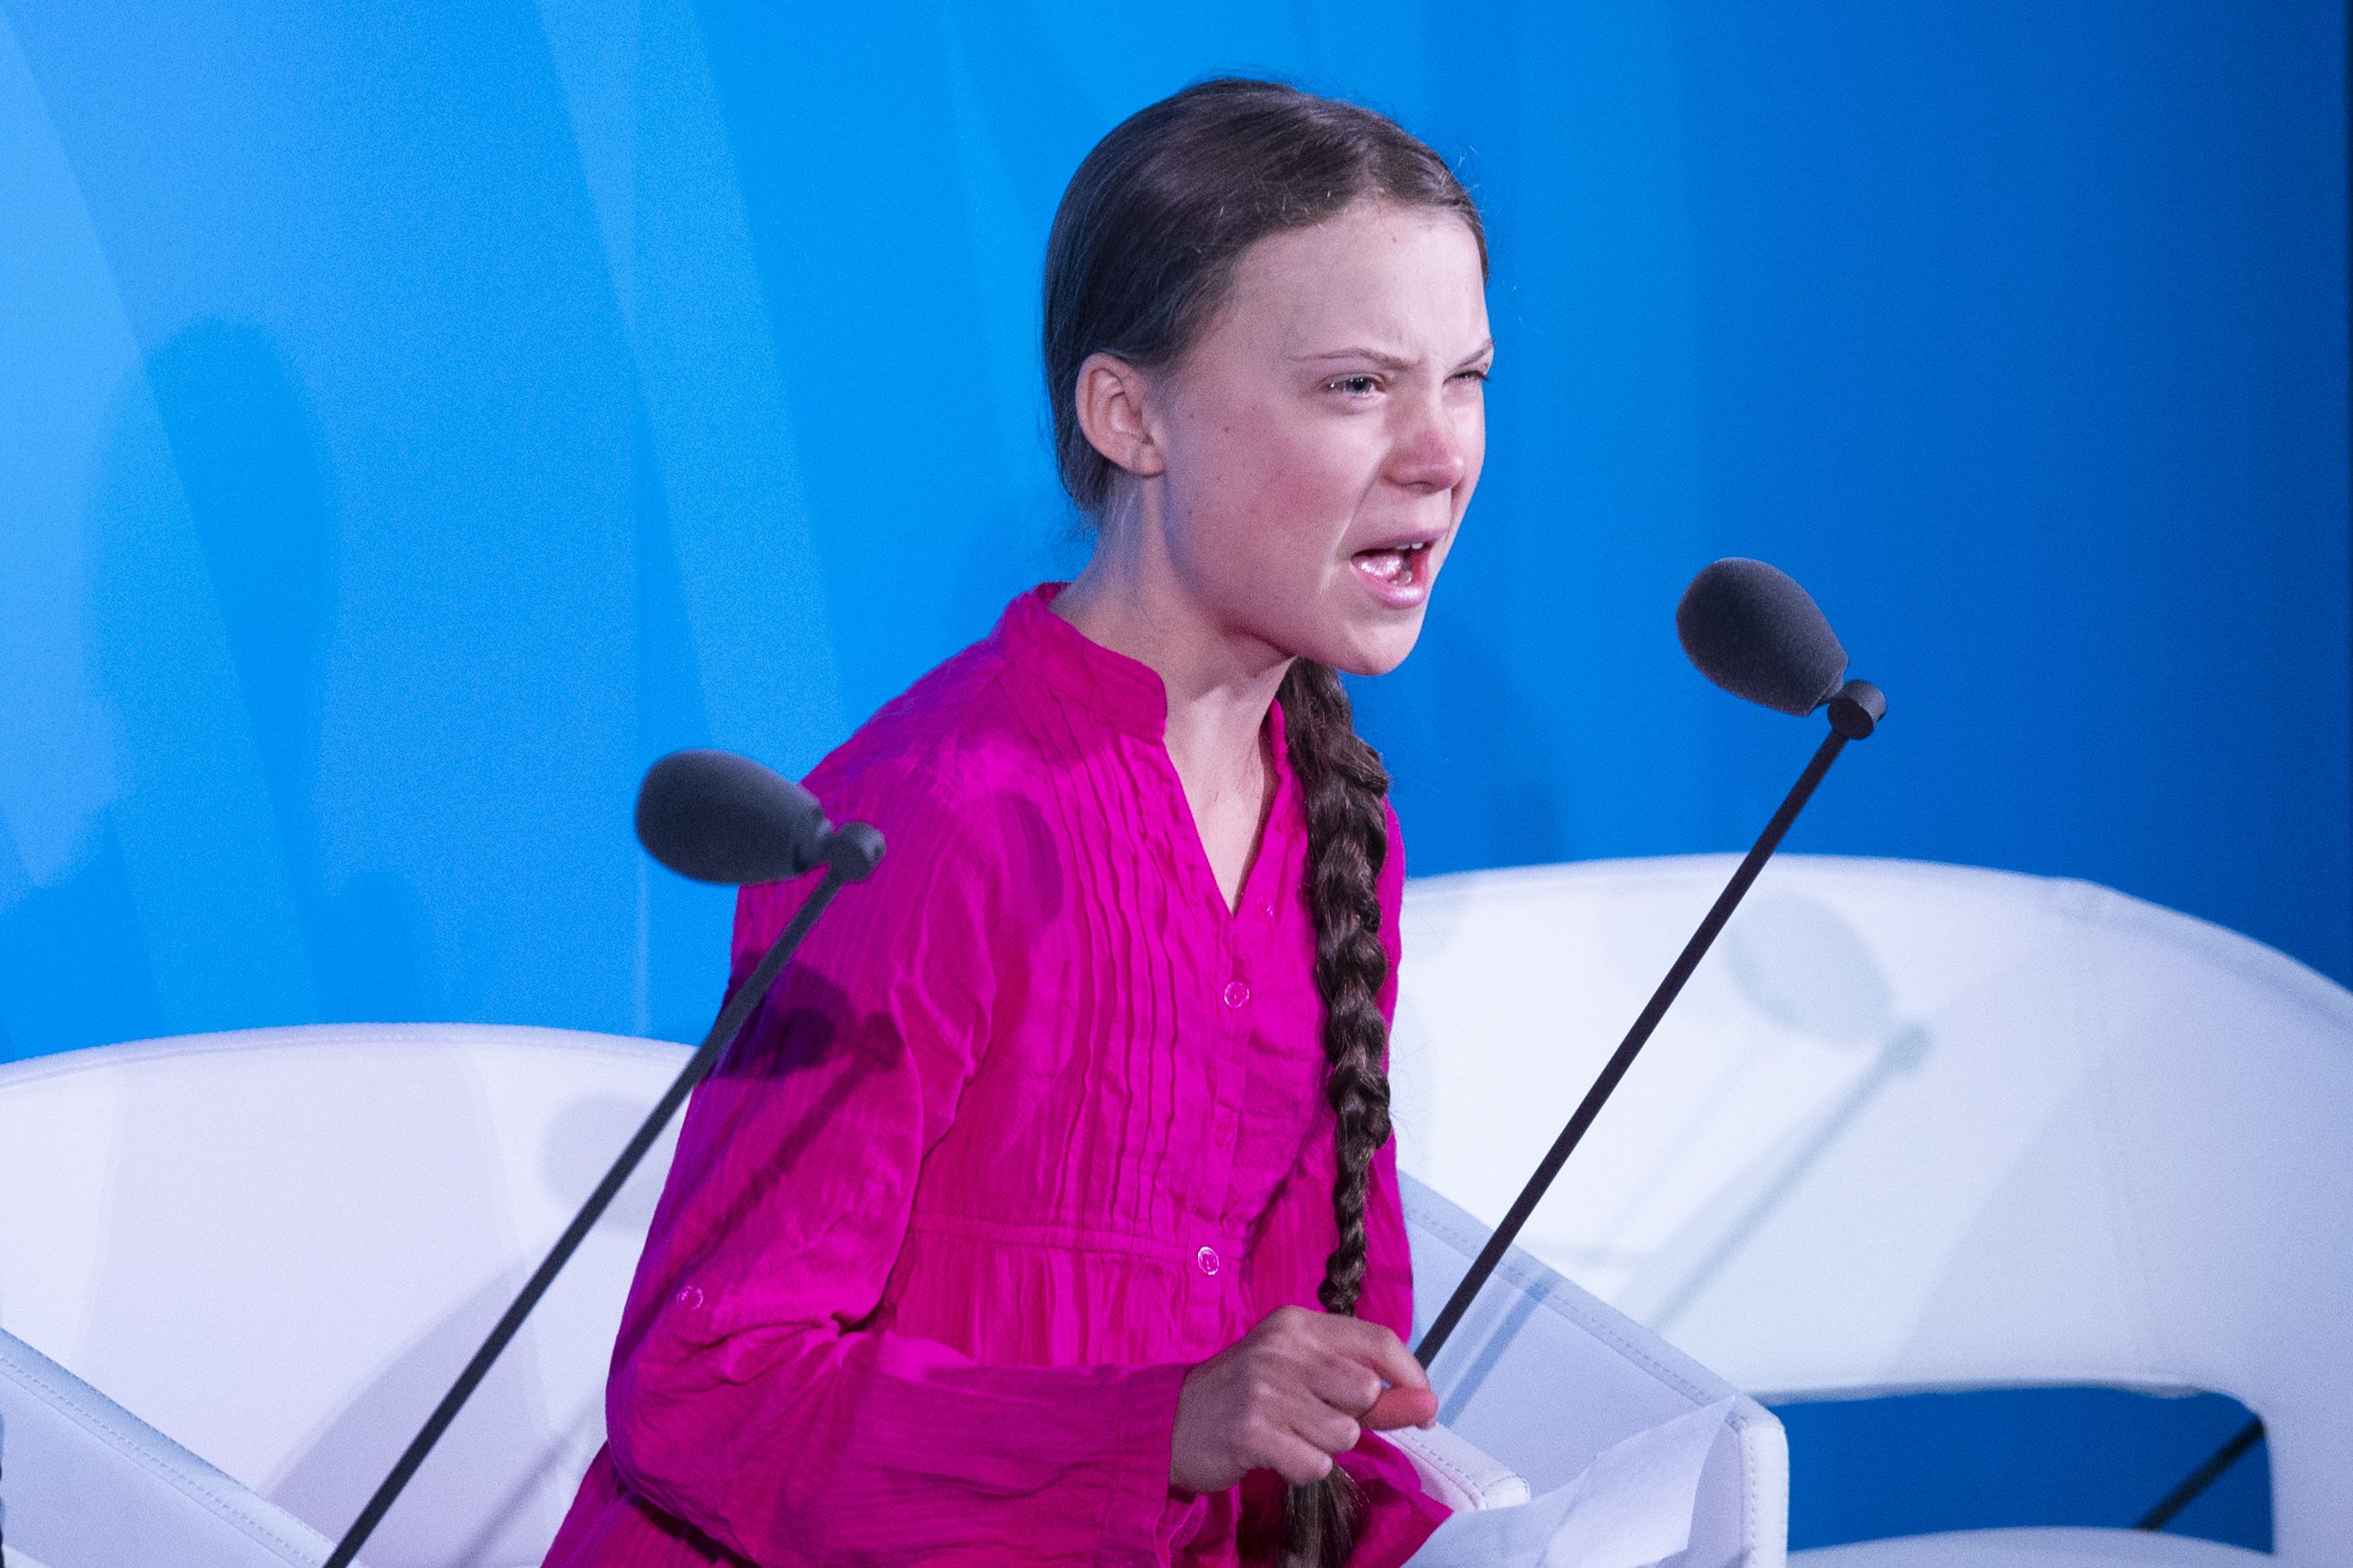 Youth Climate activist Greta Thunberg speaks during the UN Climate Action Summit on September 23, 2019 at the United Nations Headquarters in New York City.